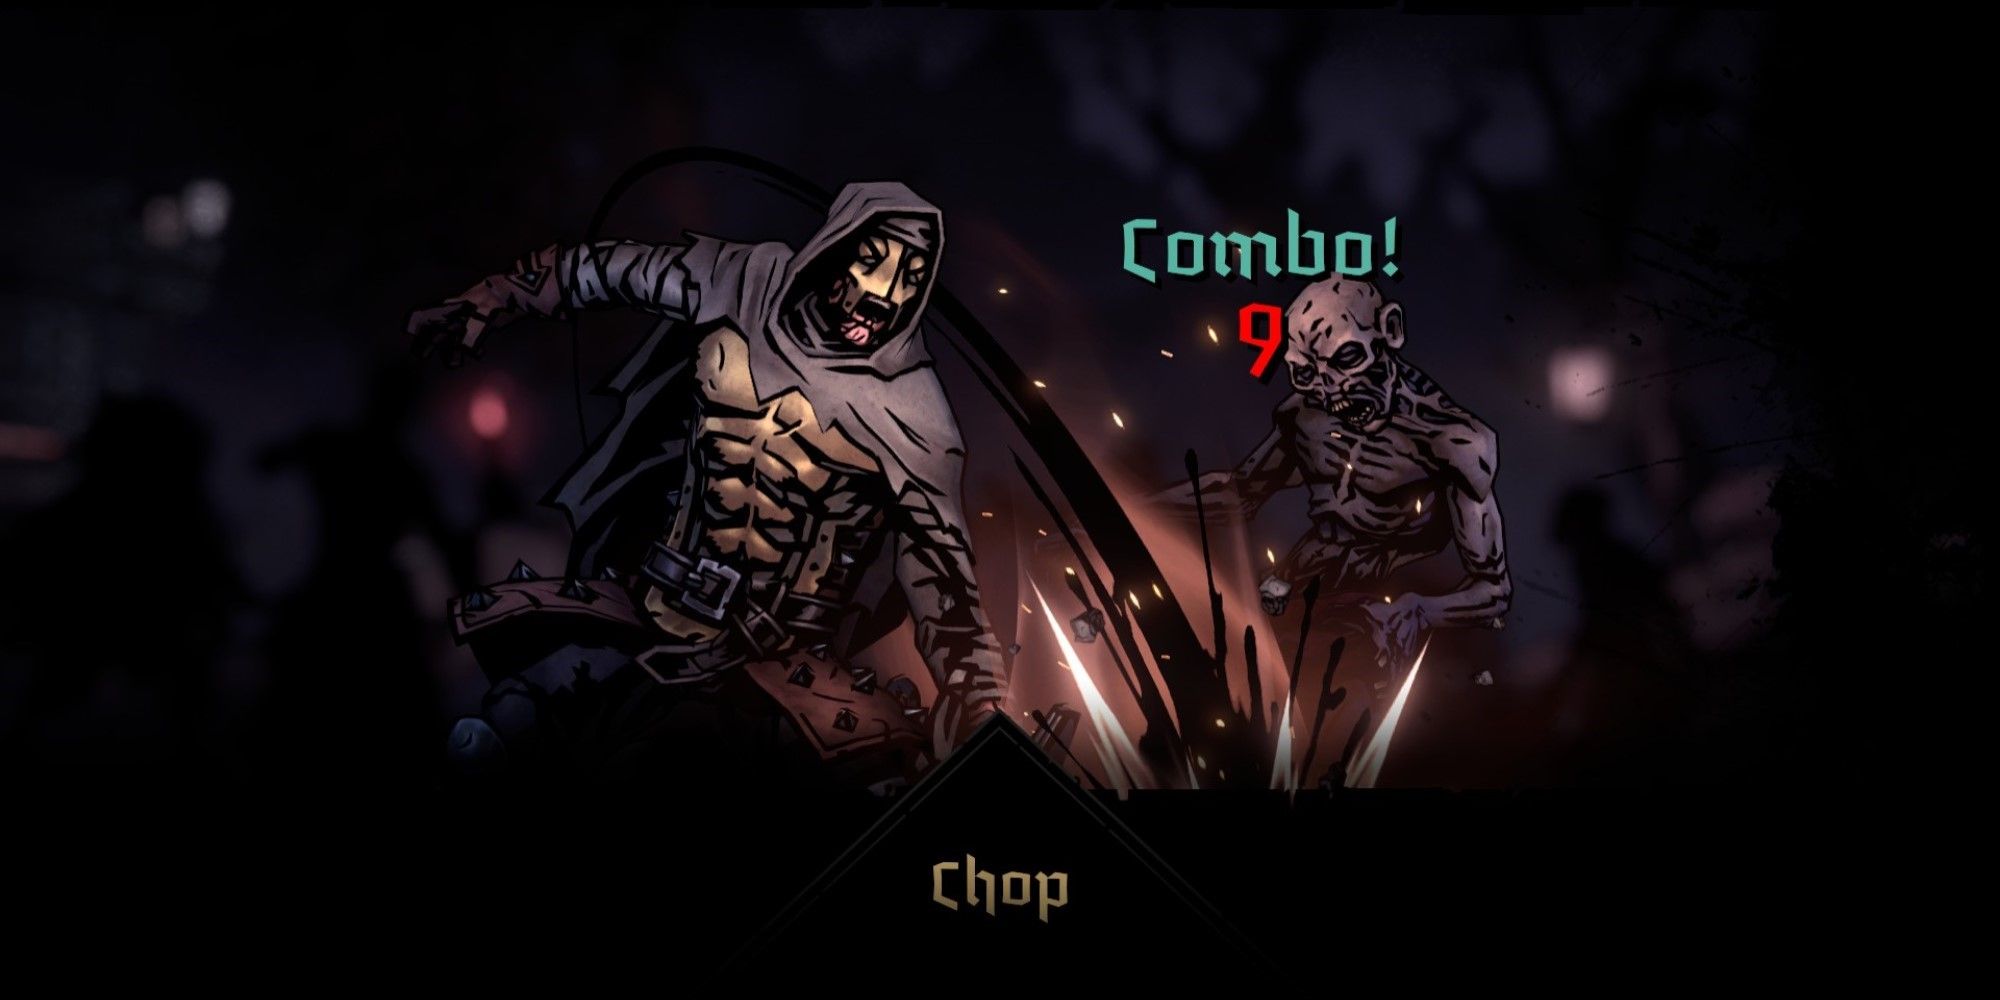 A screenshot of the Chop Skill being used in Darkest Dungeon 2